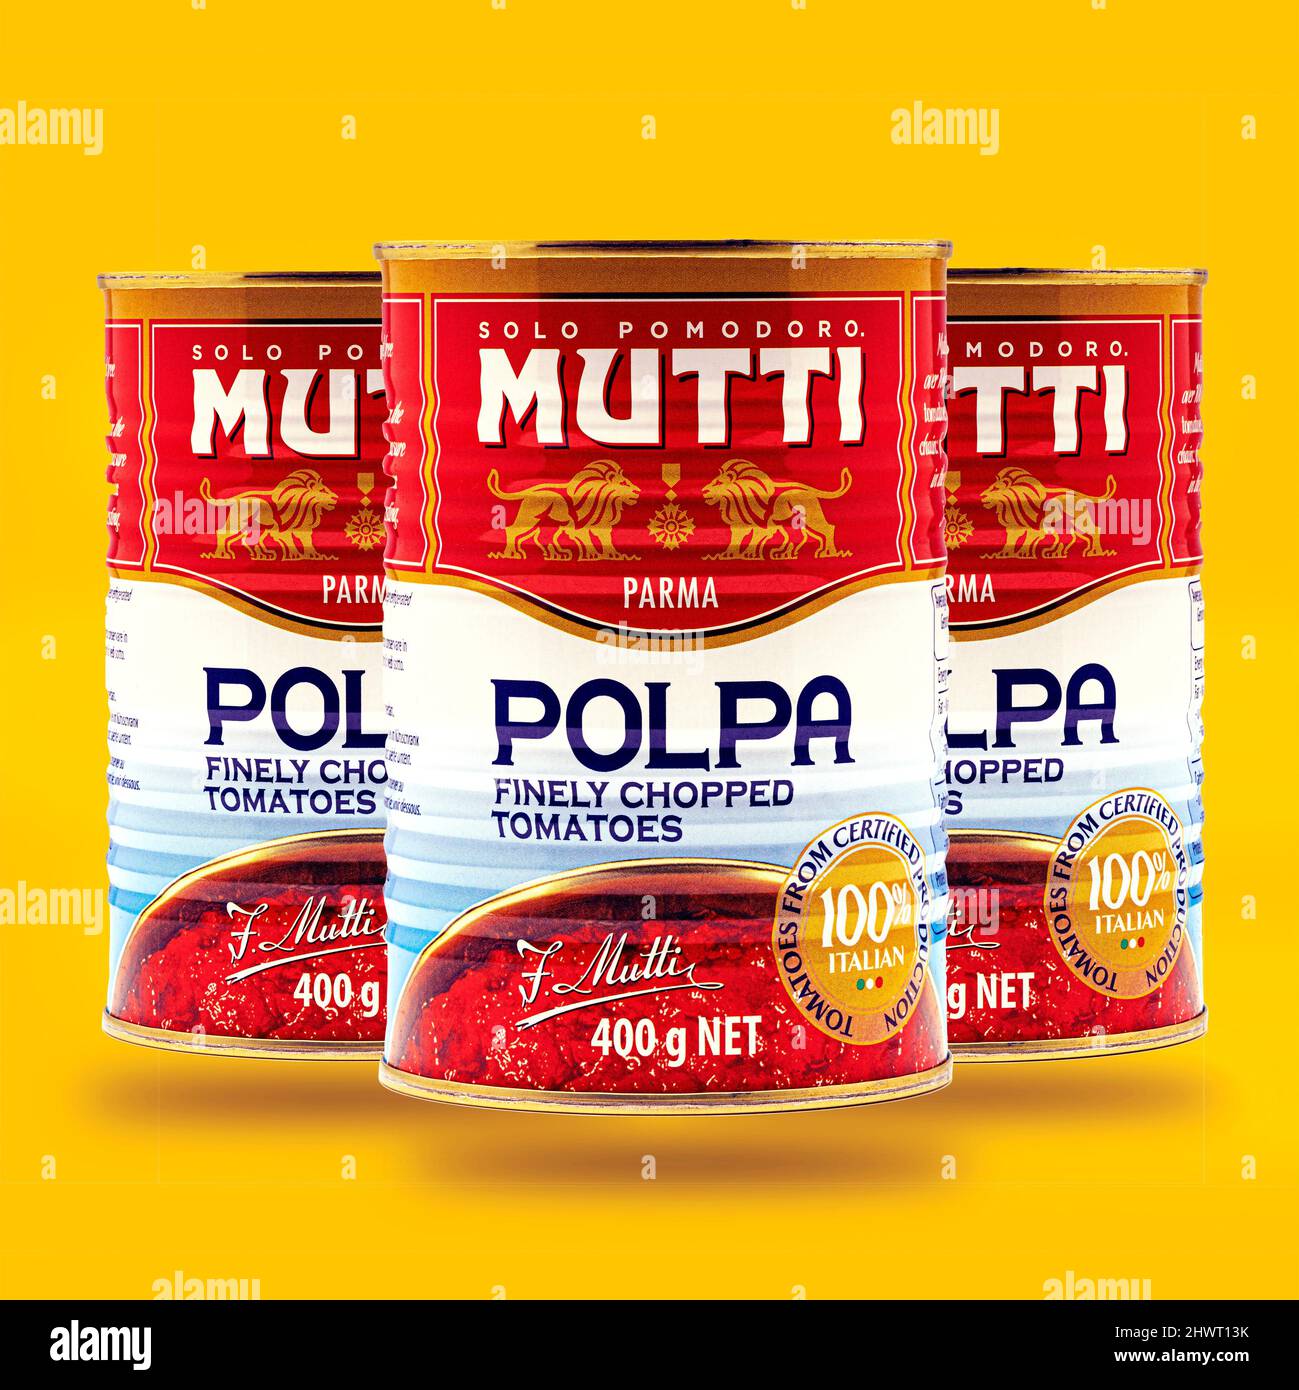 SWINDON, UK - MARCH 7, 2022: 3 Cans of Mutti Finely Chopped Tomatoes on a yellow background Stock Photo